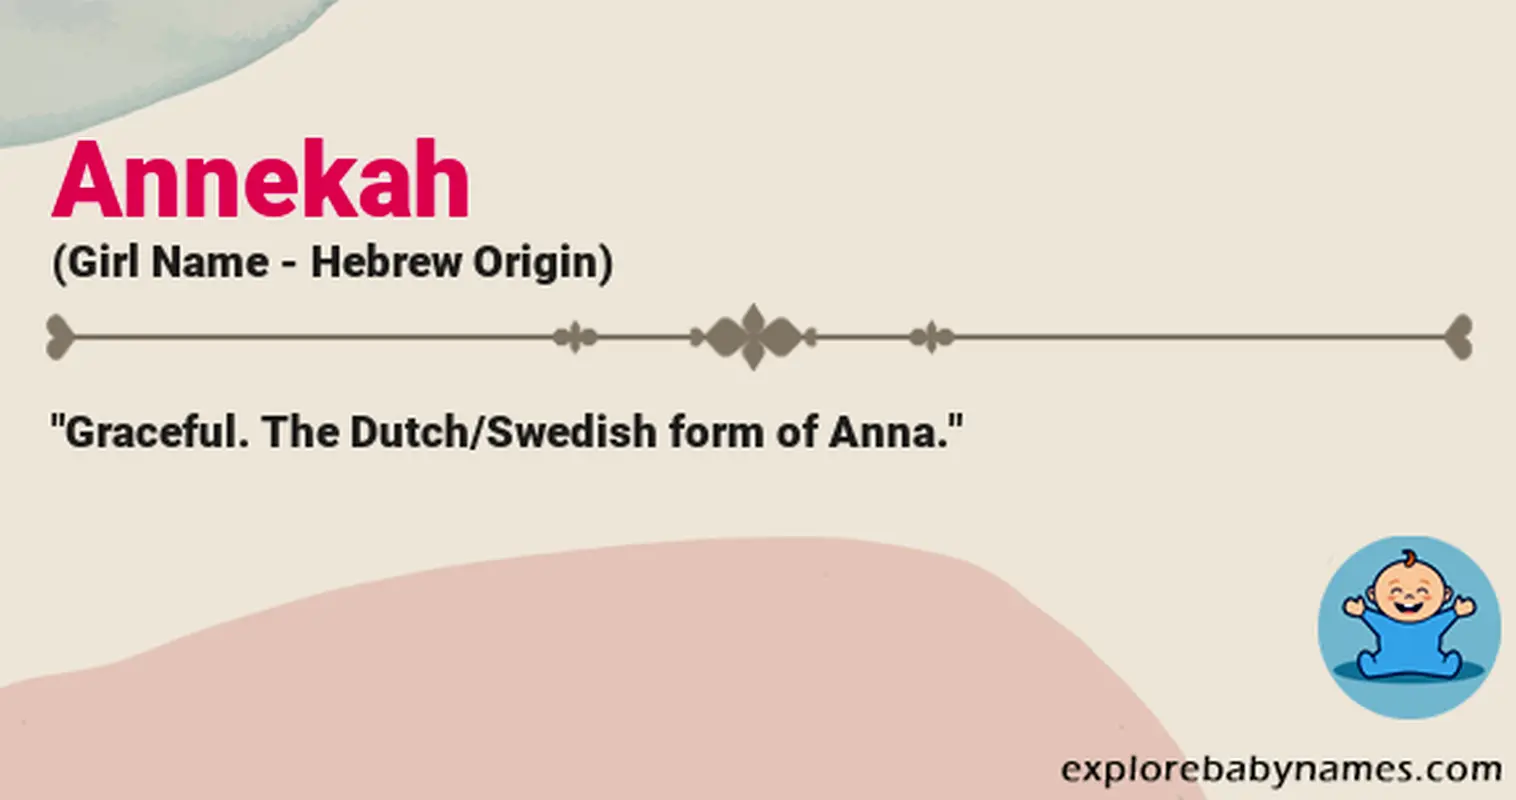 Meaning of Annekah